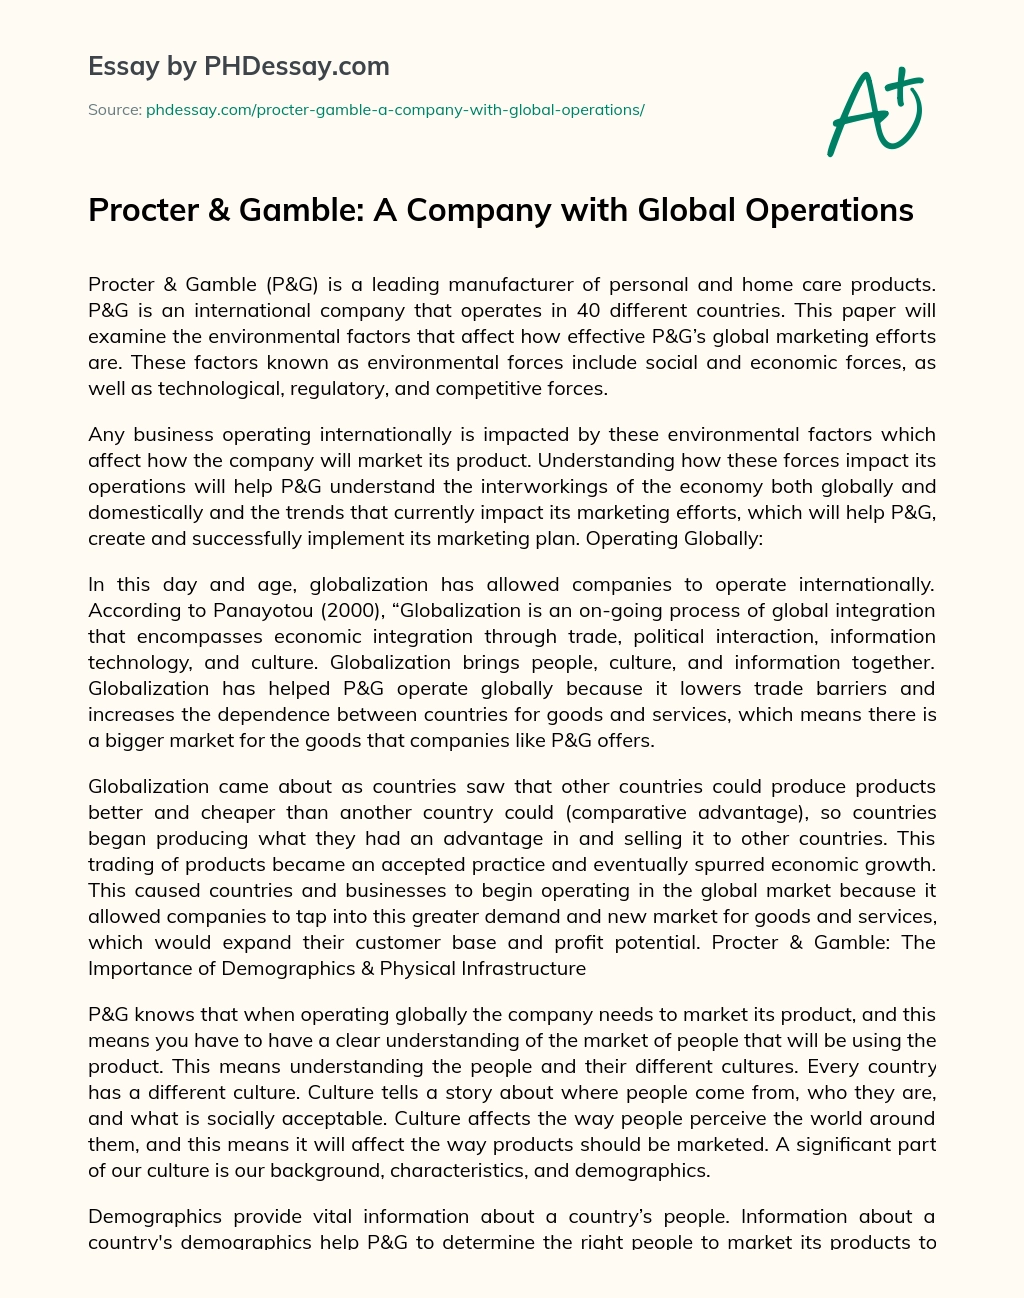 Procter & Gamble: A Company with Global Operations essay